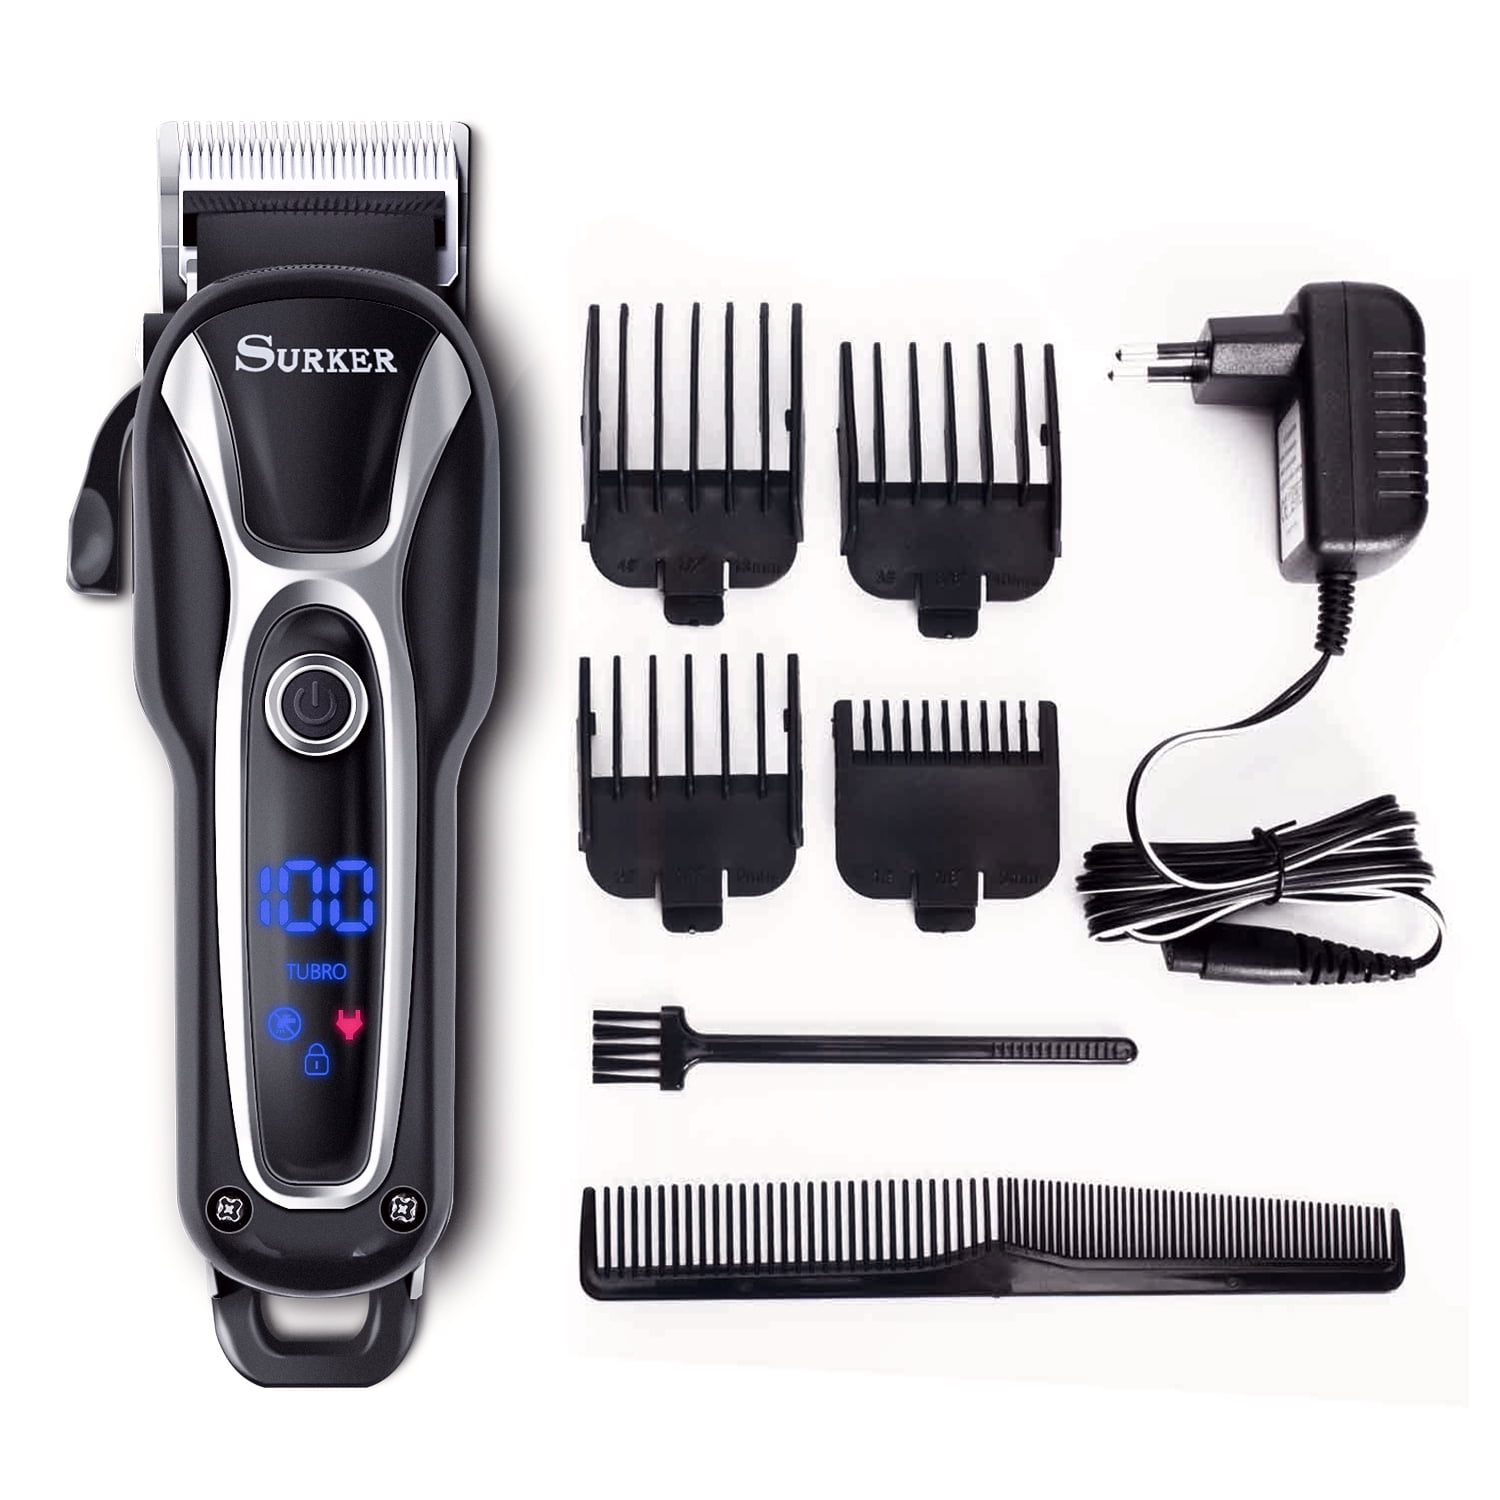 Surker SK-80502 Hair Clipper Men's Electric Cordless Hair Trimmer Speed  Adjustable Professional Haircut Beard Trimmer Hair Cutting Machine Kit with  Ceramic Cutting Head four Attachment Combs 